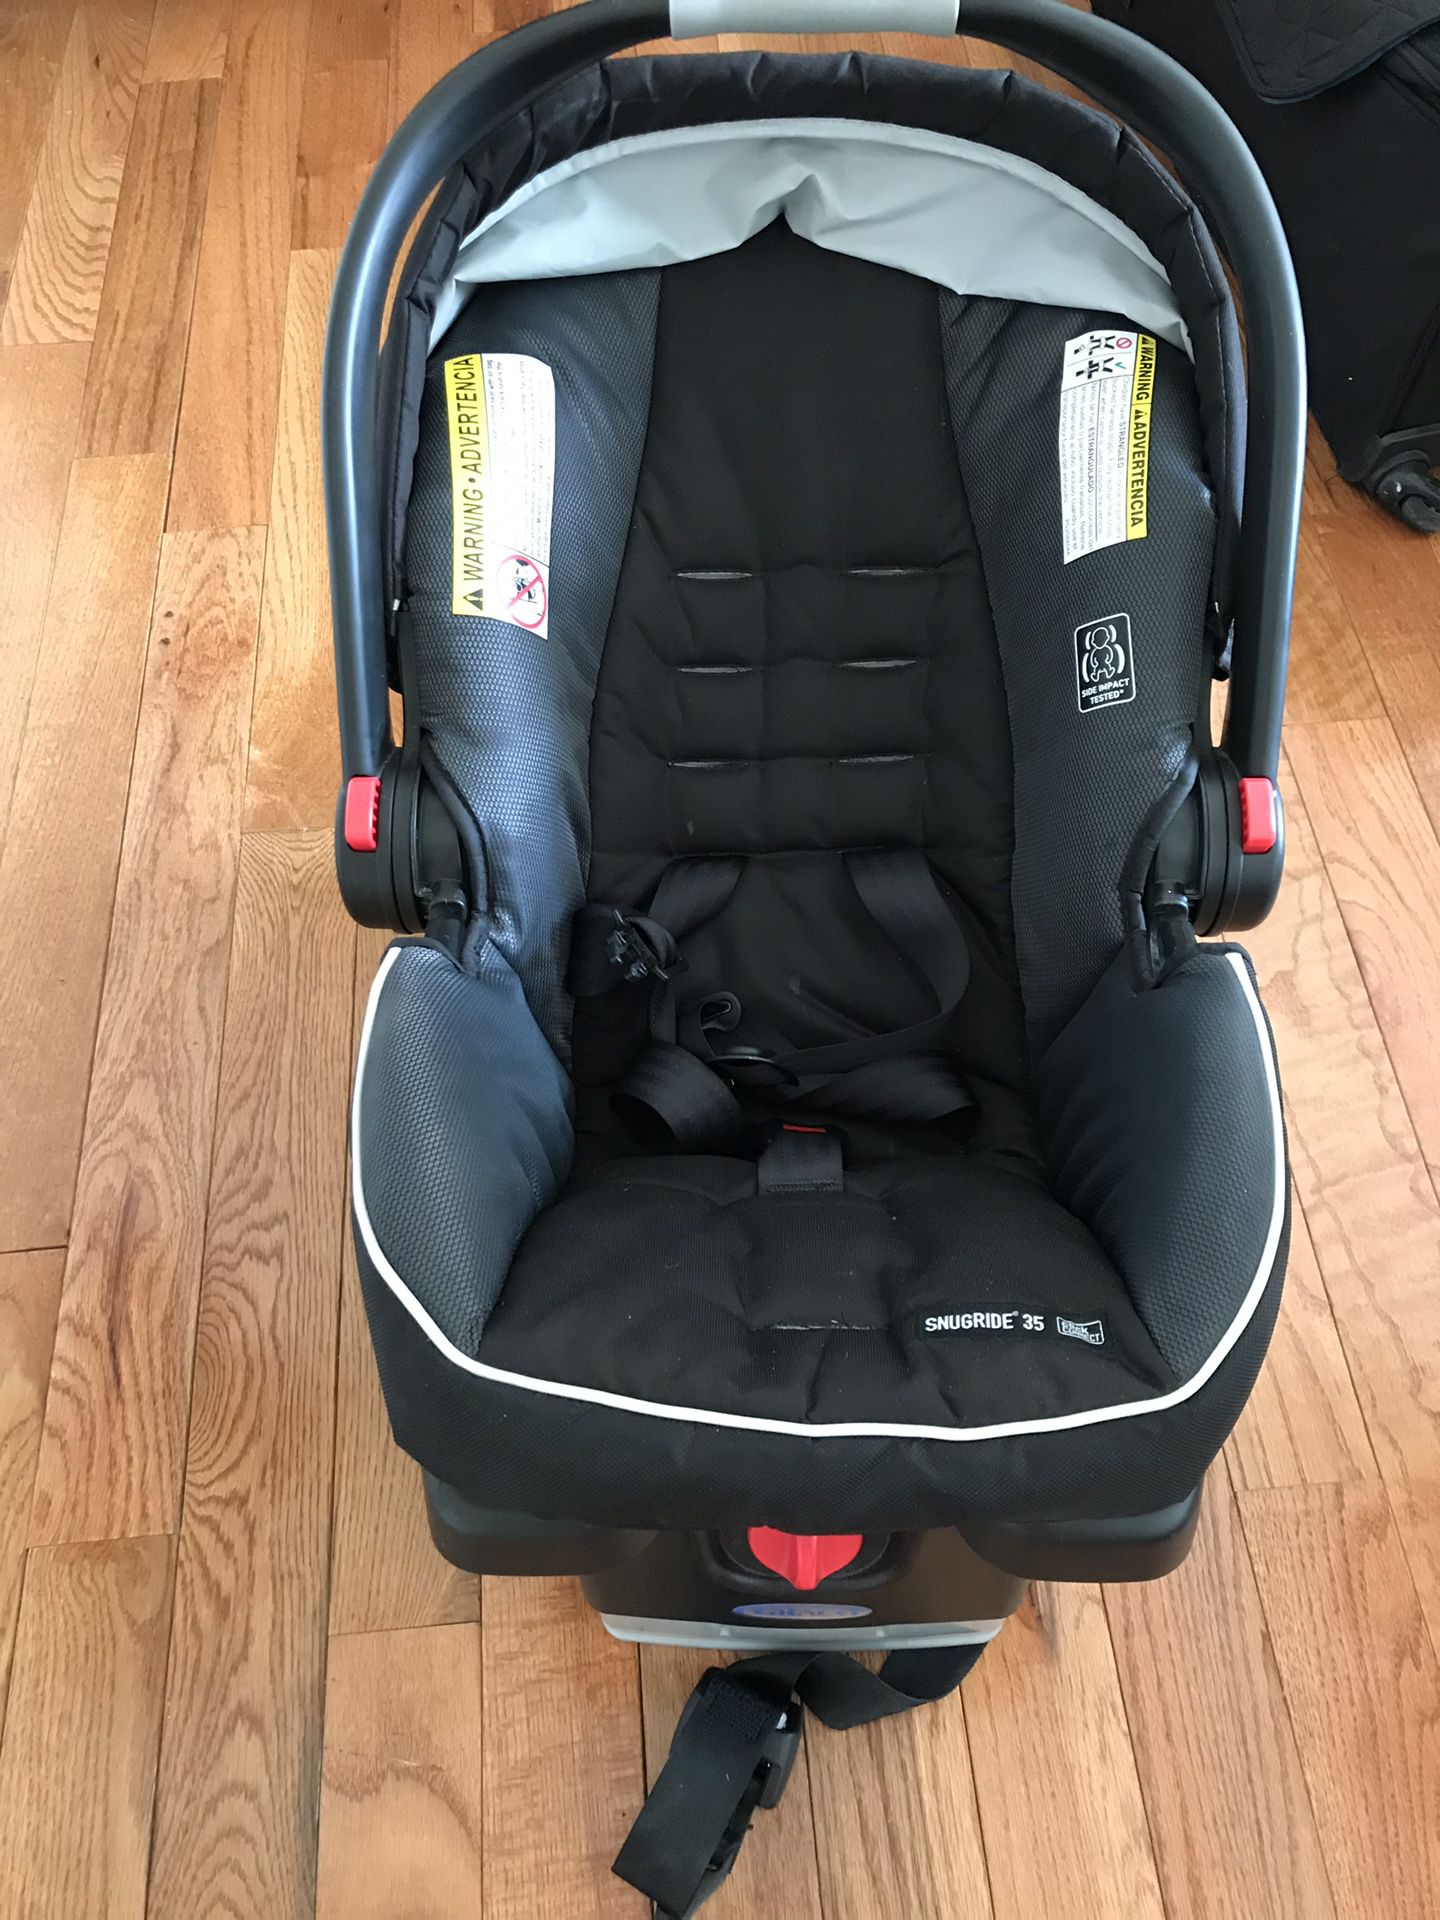 Graco Aire3 Travel System (only car seat), Gotham